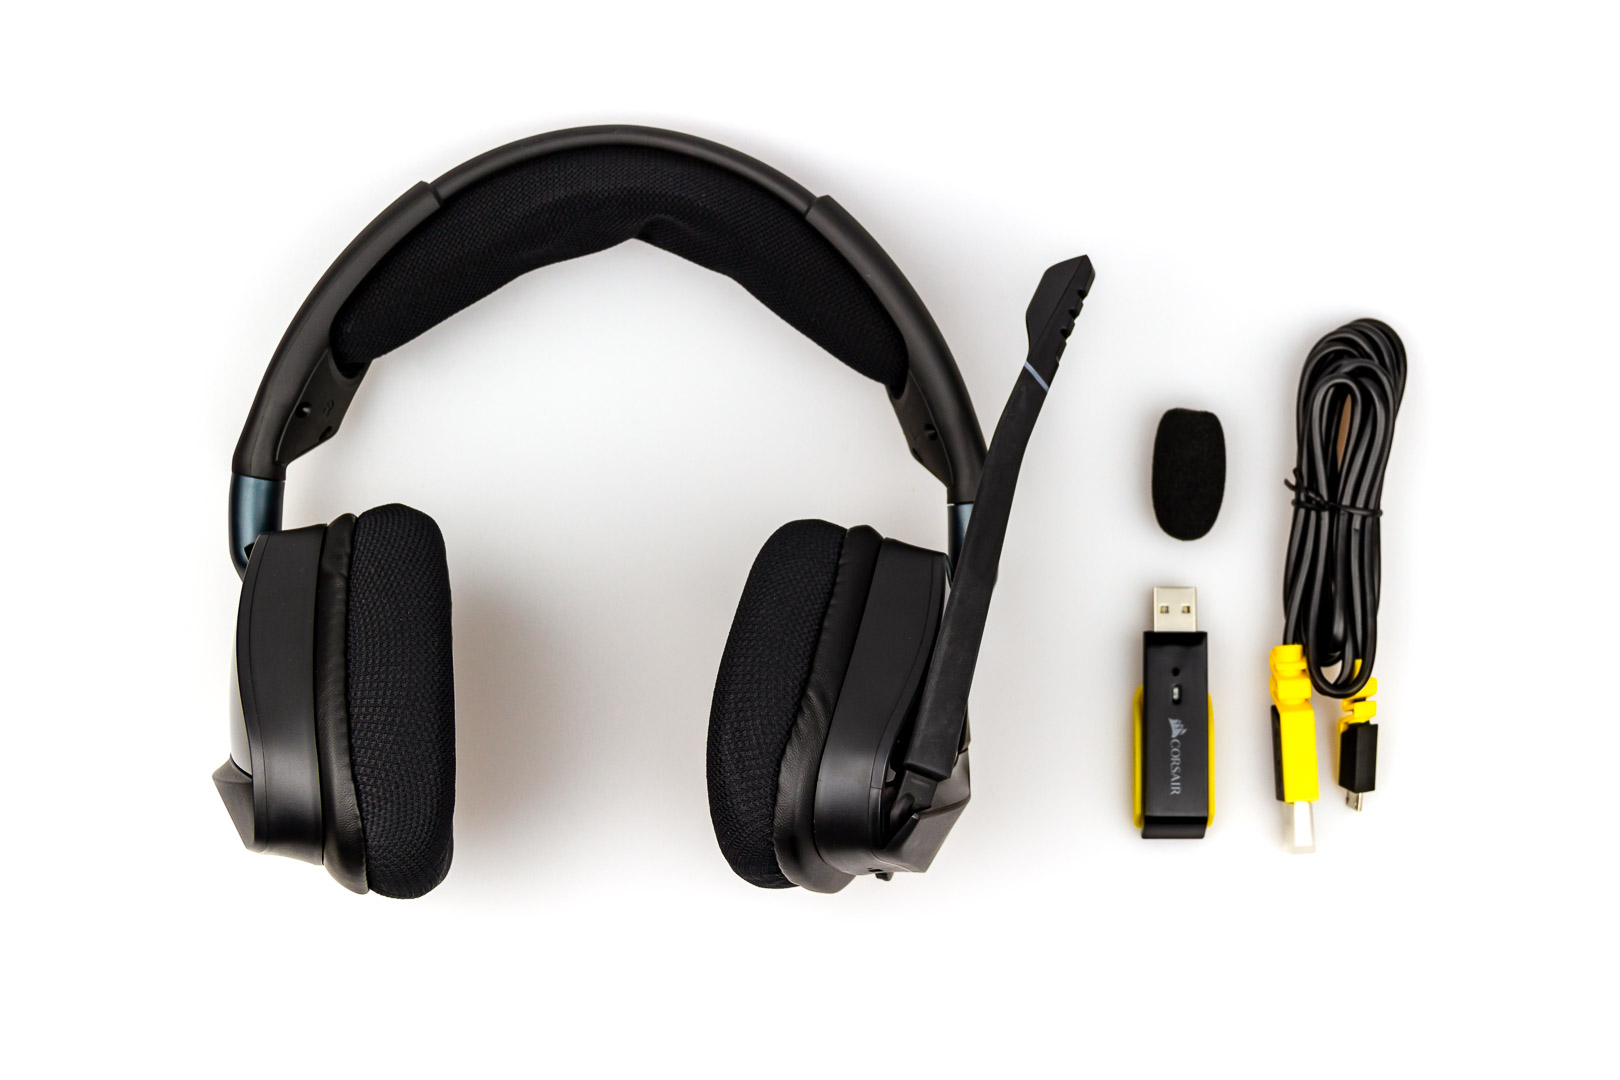 corsair-wireless-gaming-headset-how-to-charge